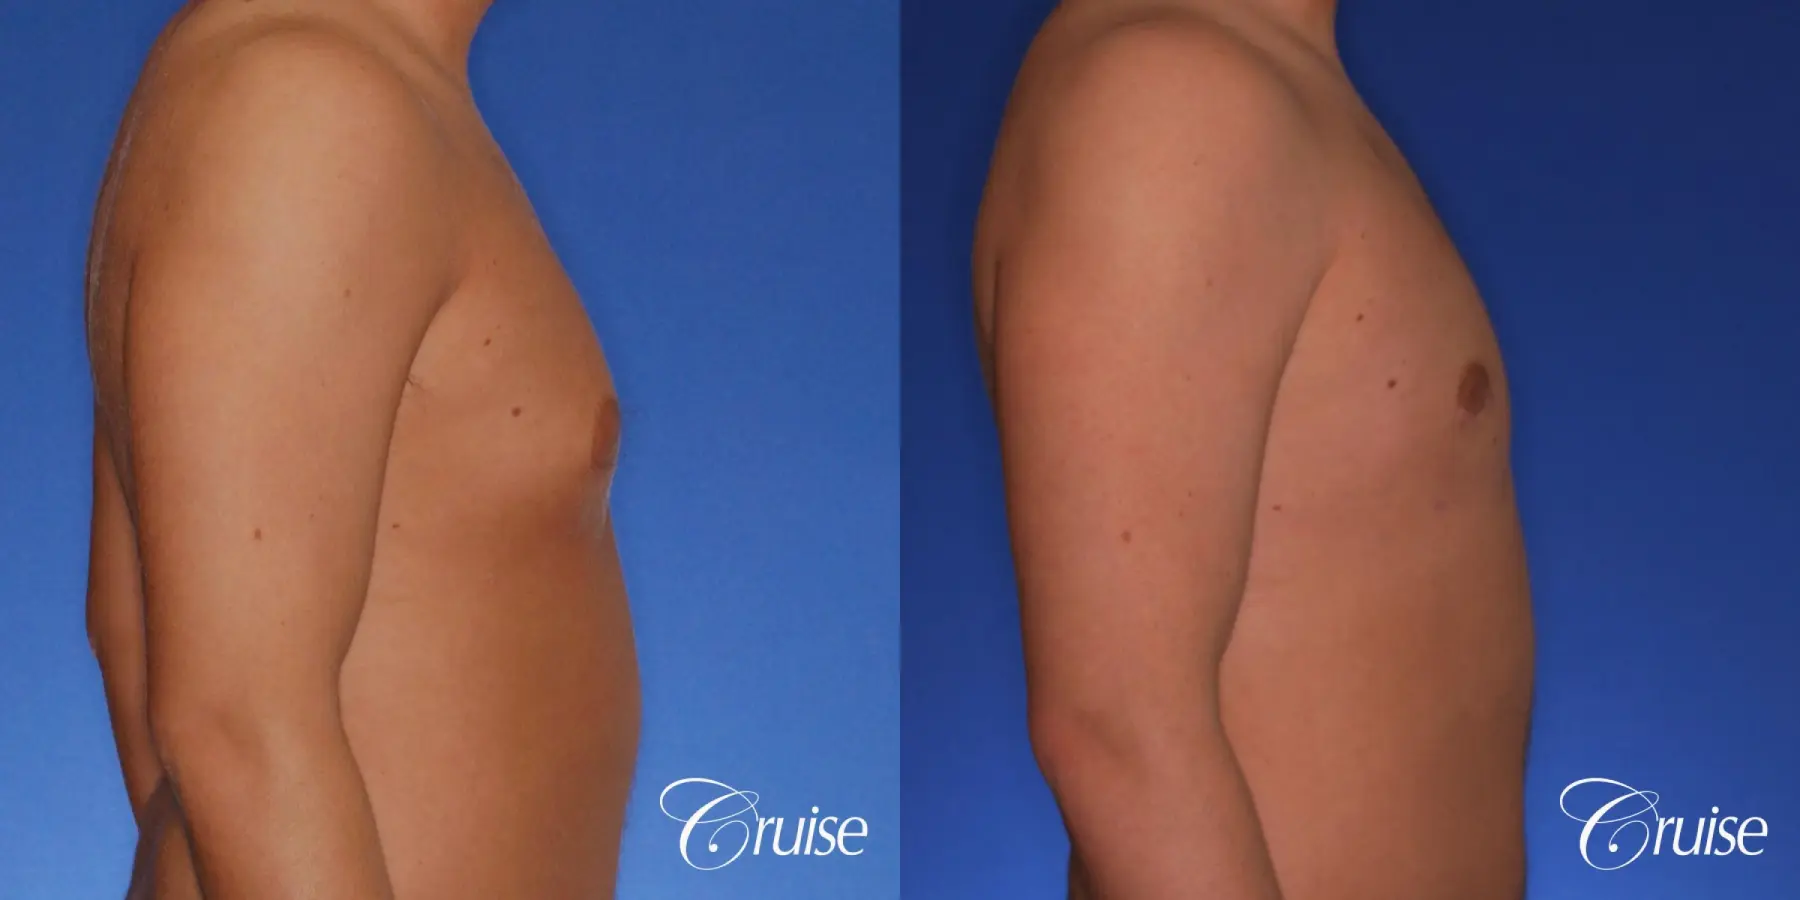 best puffy nipple gynecomastia results with plastic surgeon, Joseph Cruise, M.D. - Before and After 3